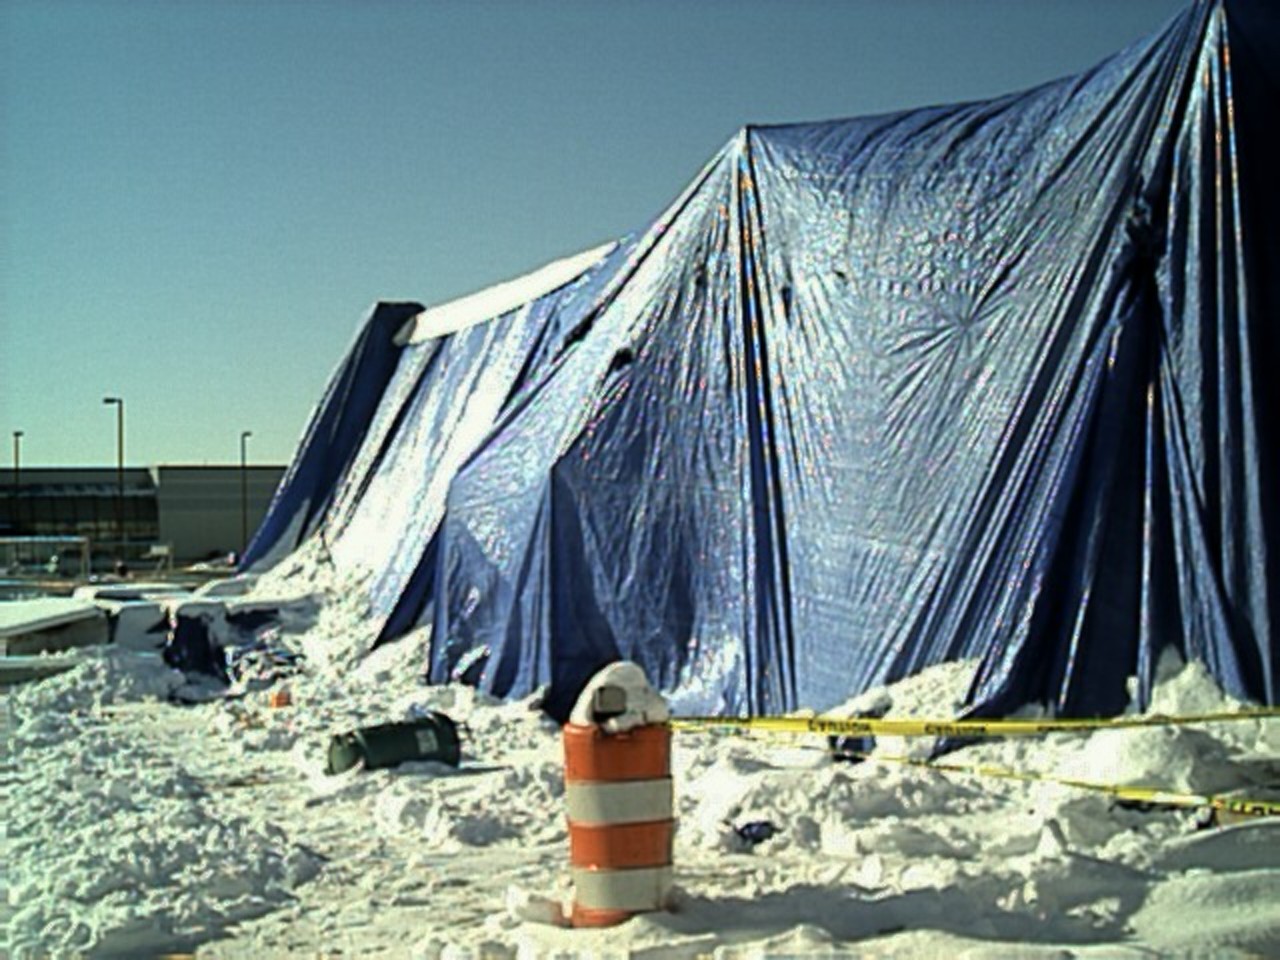 The tarps barely survived. we had to clear off the snow from the tops to relieve the pressure.